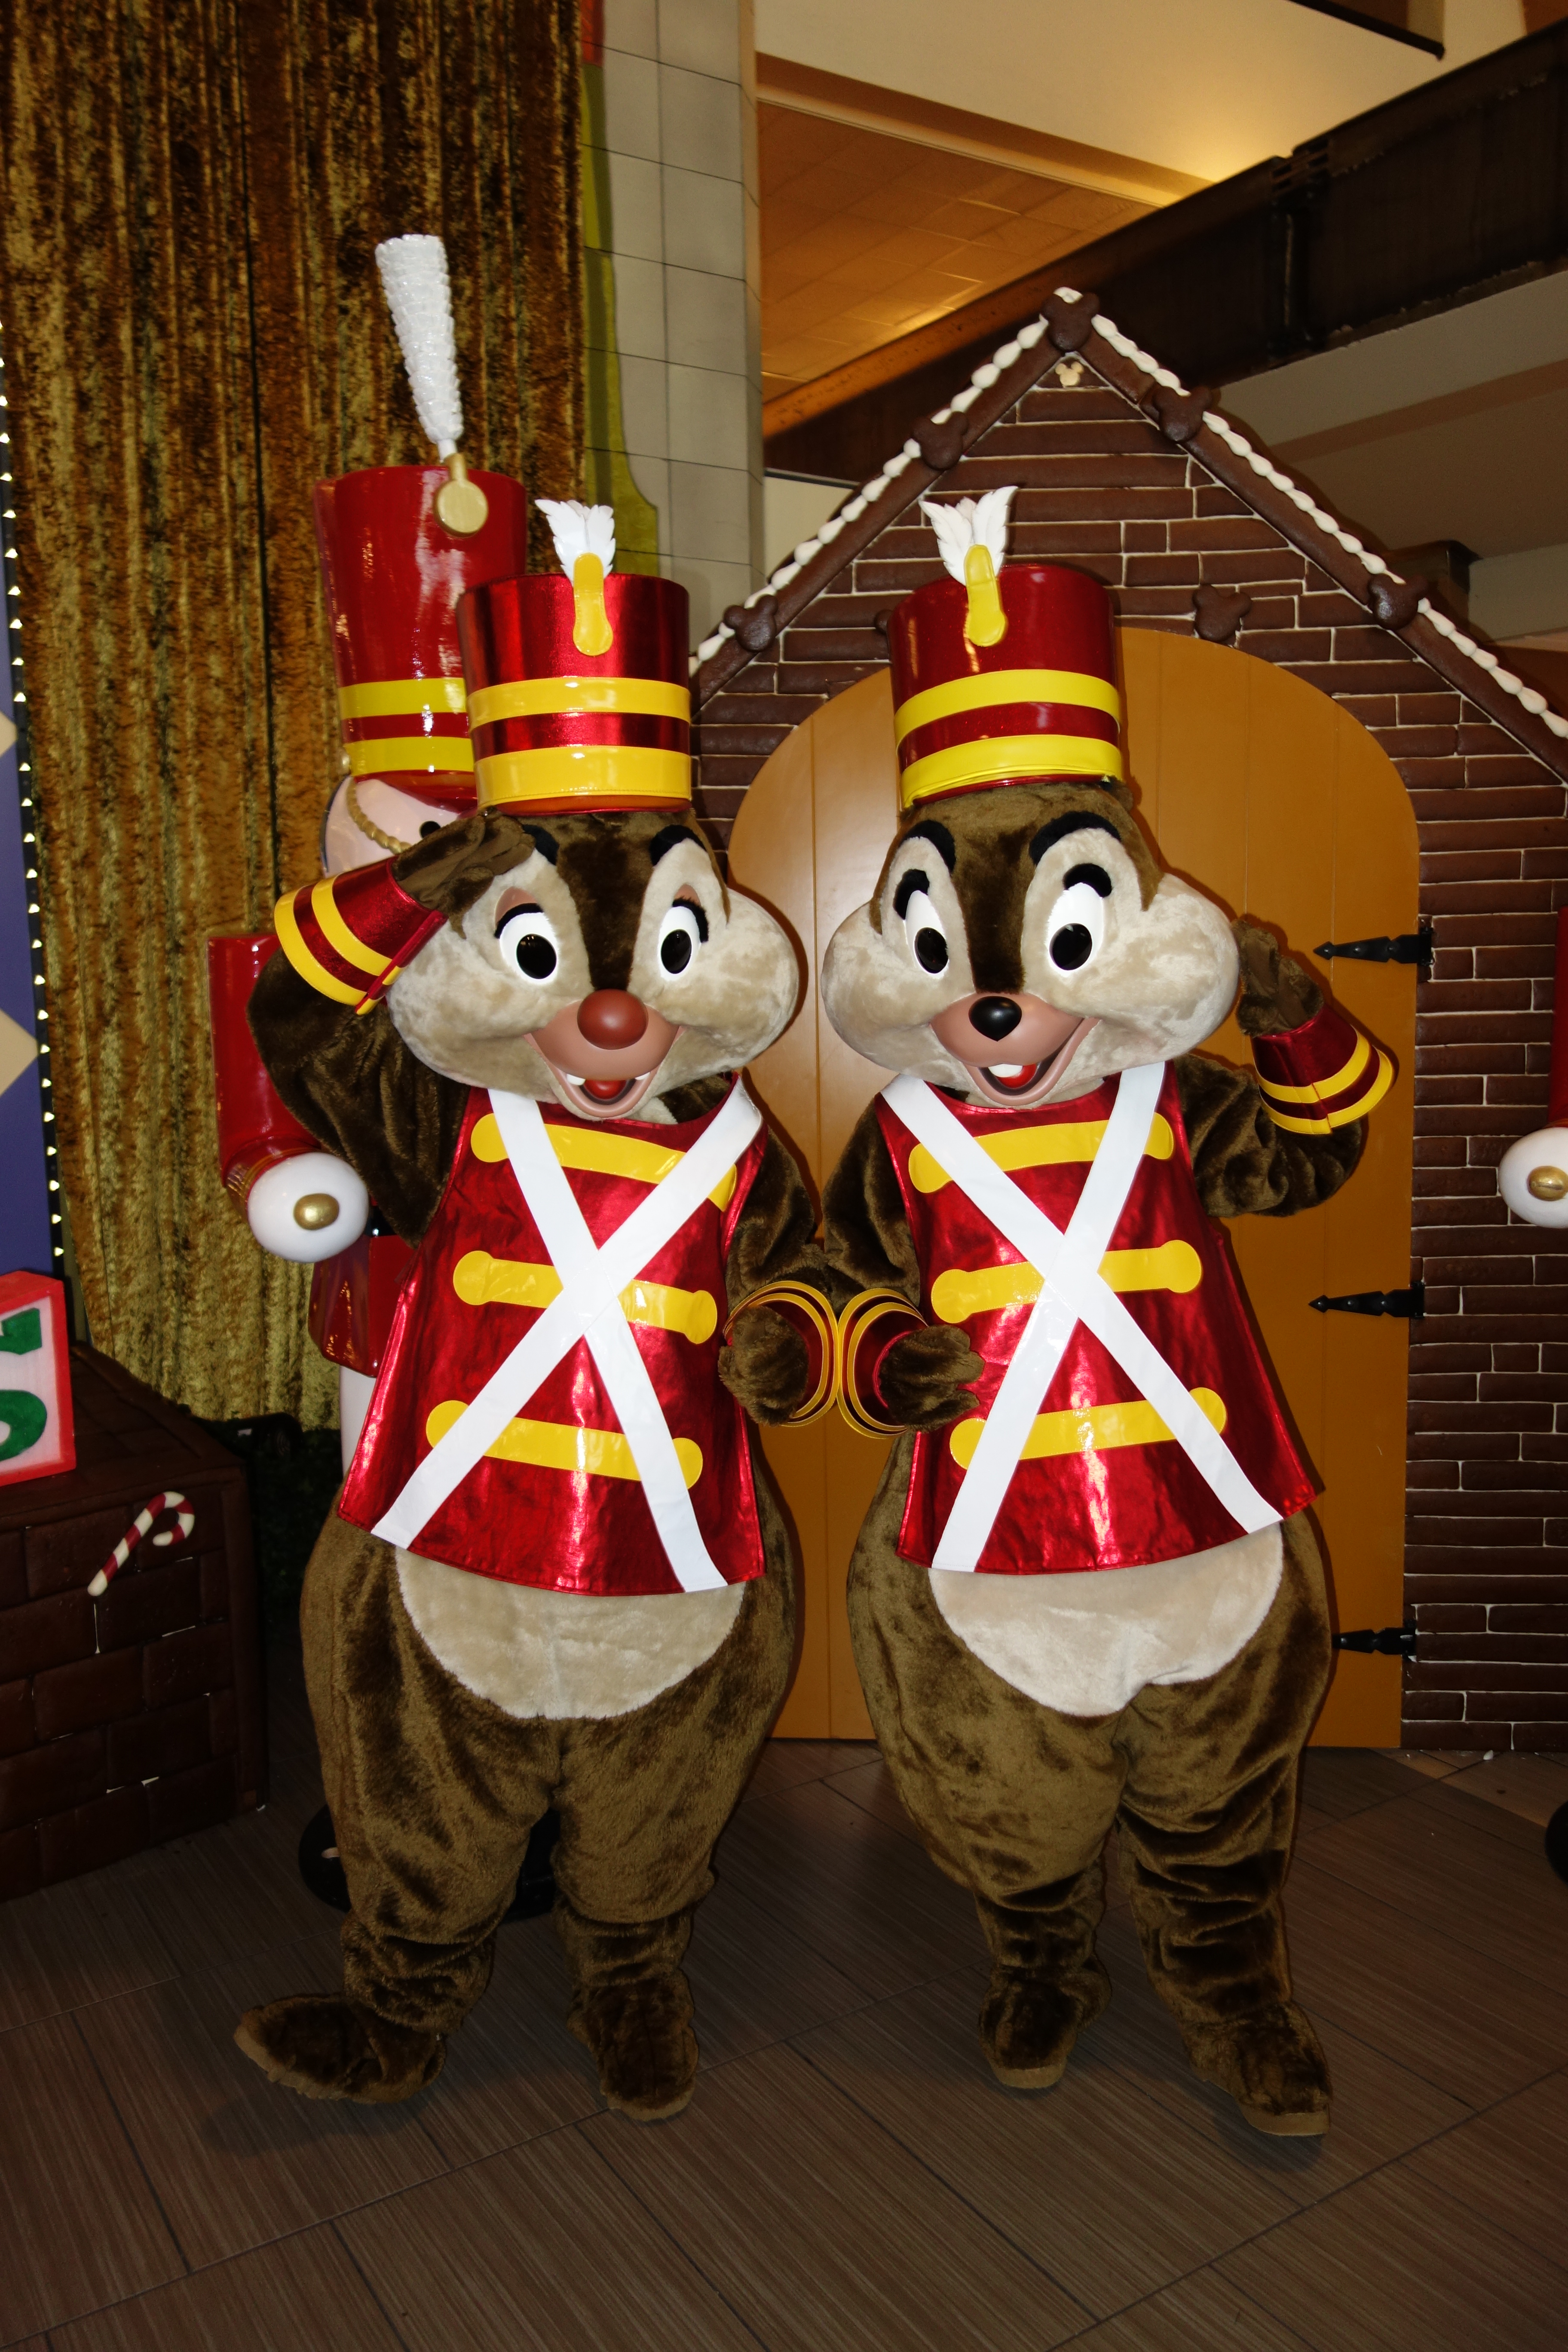 Walt Disney World, Contemporary Resort, Christmas Characters, Chip n Dale, Toy Soldiers